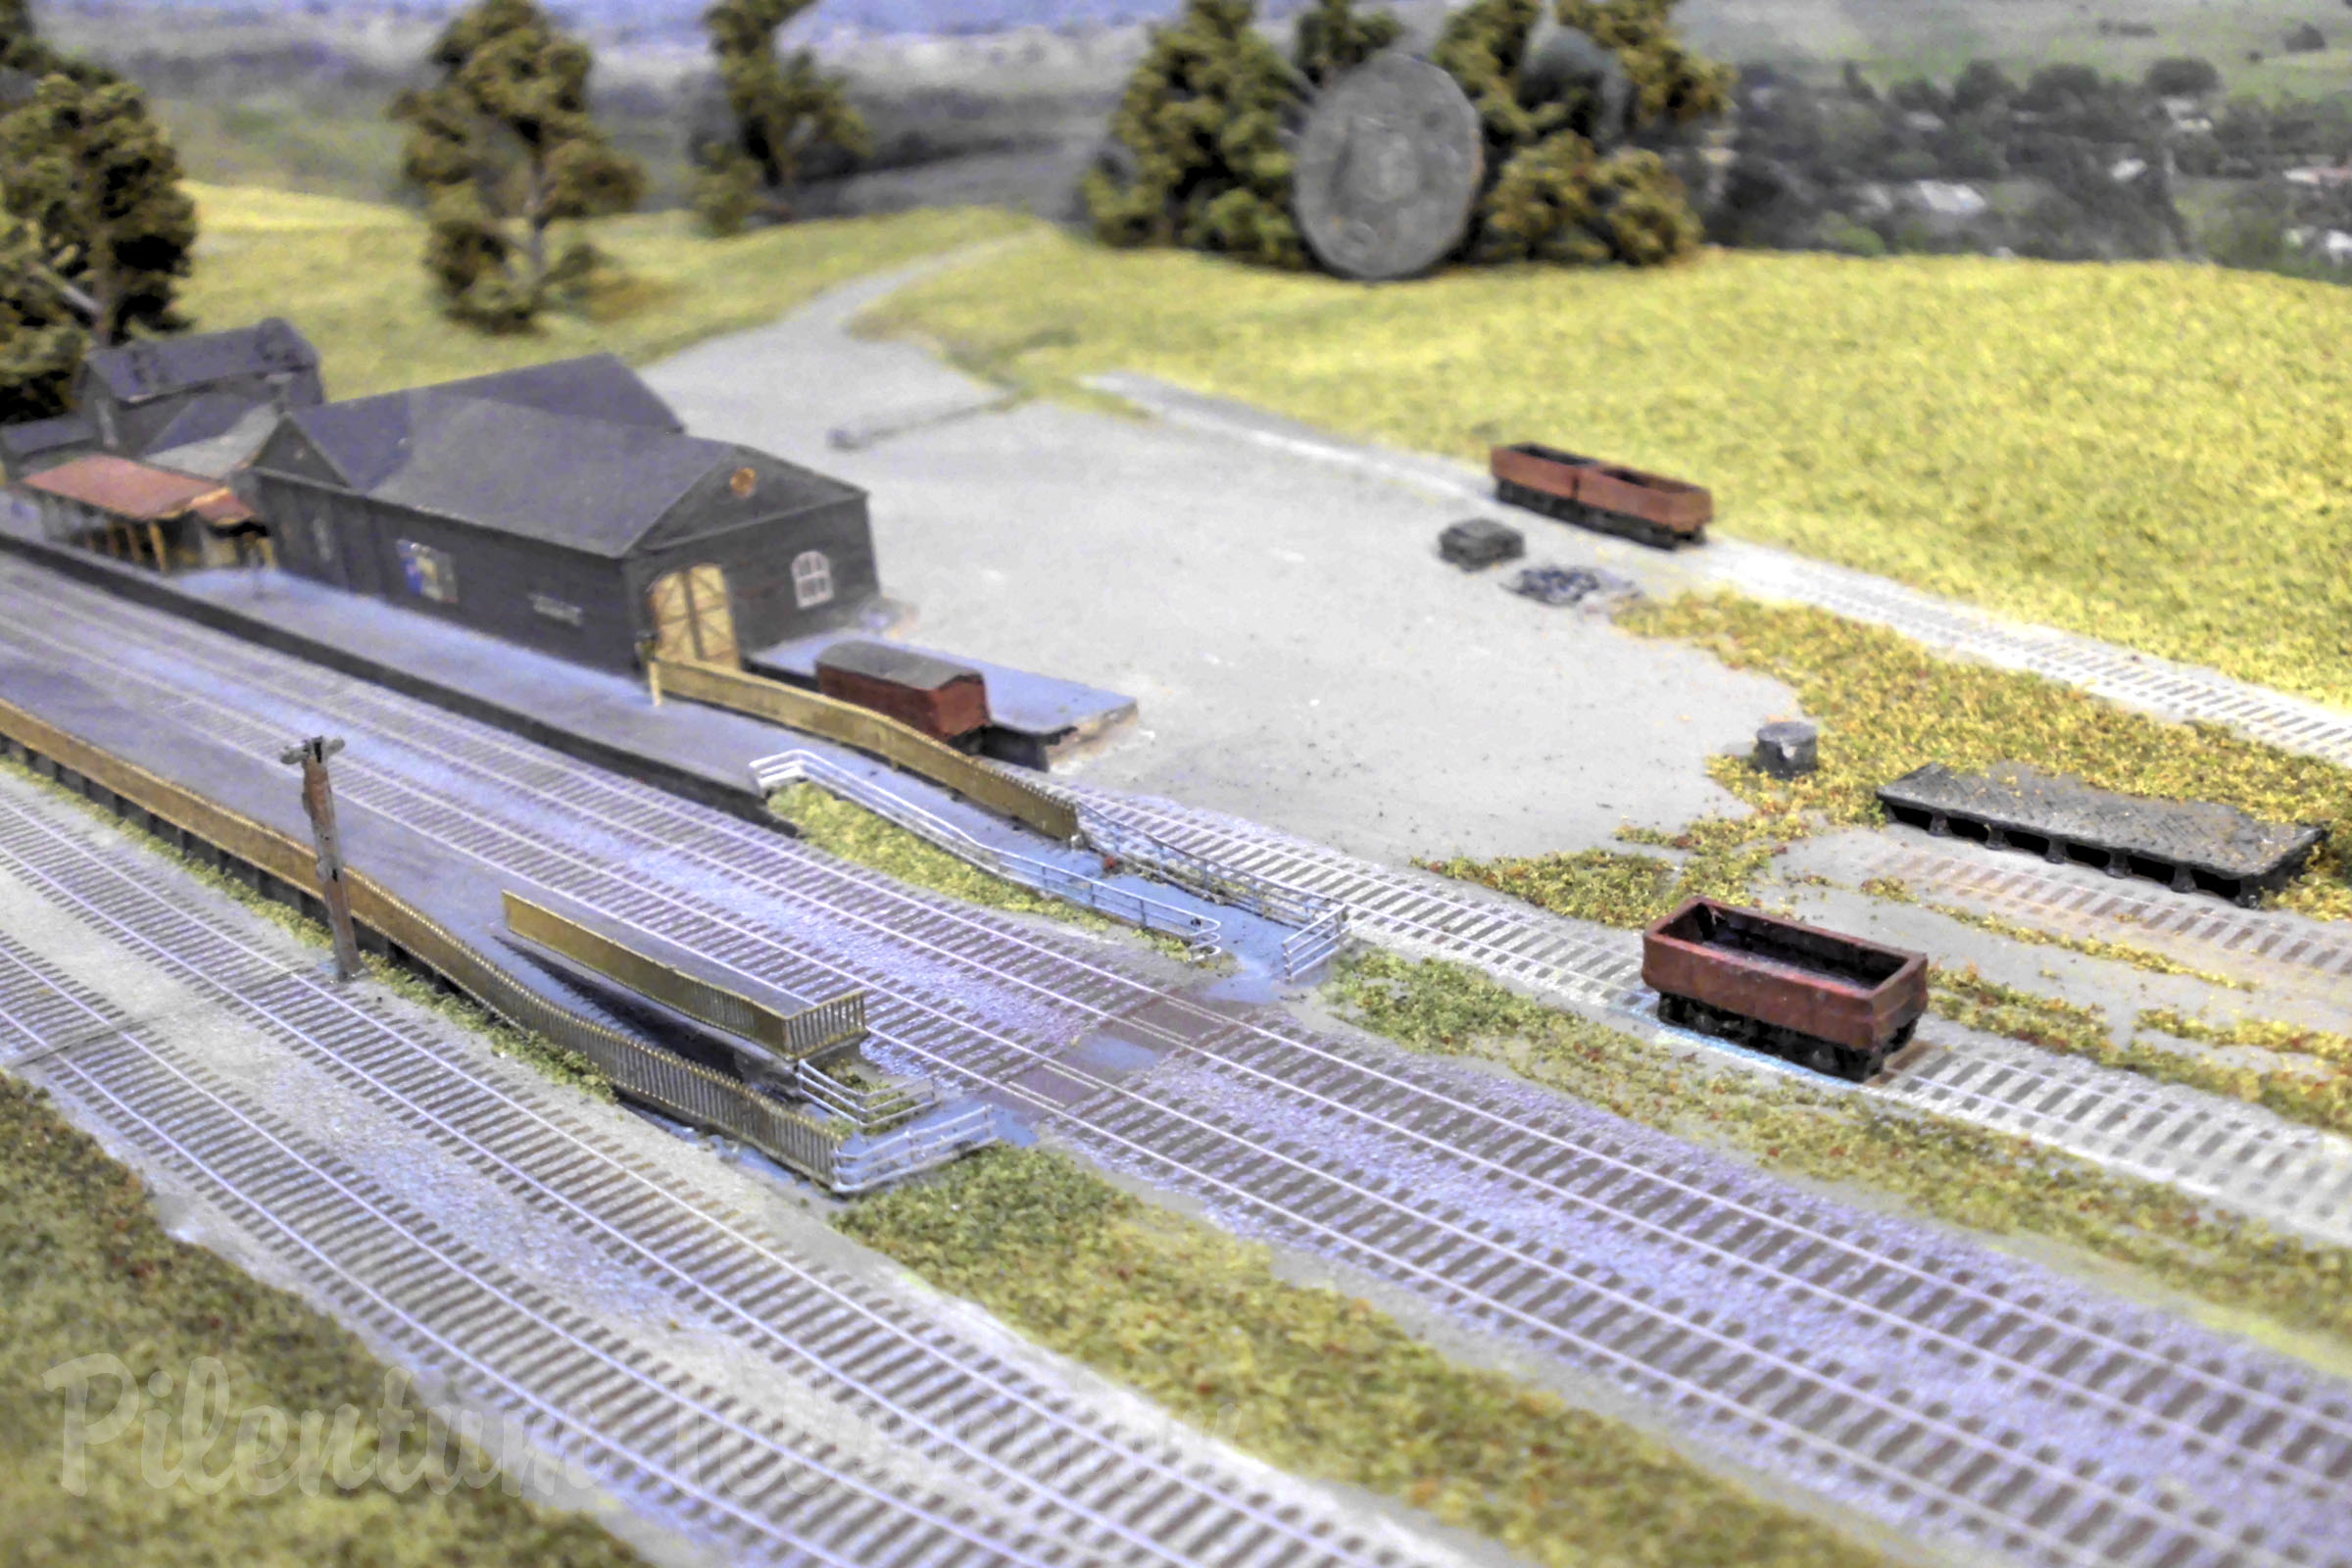 One of the Smallest T Gauge Model Railway Layouts with Self-Propelled Model Trains by Martin Kaselis